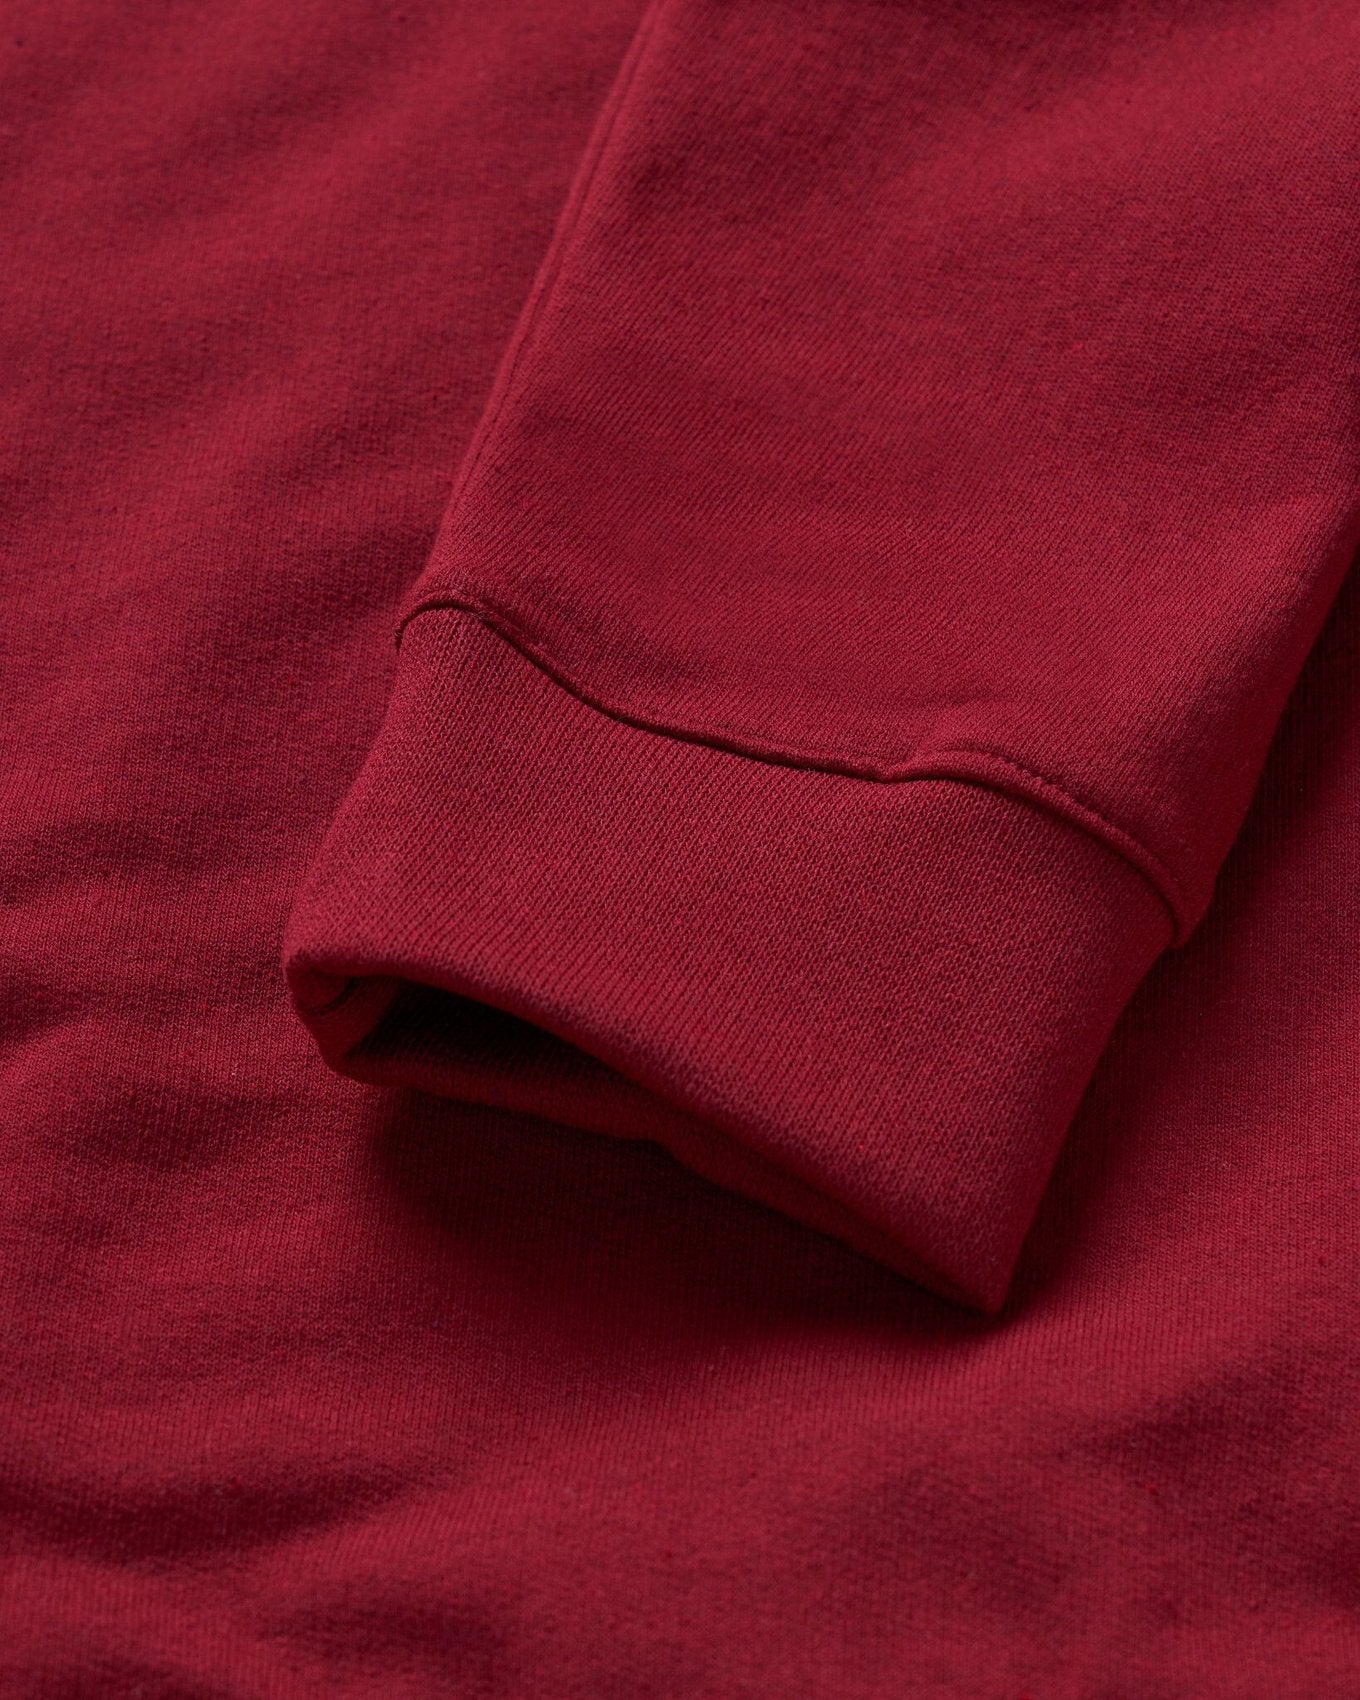 ReApparel ReApparel Crew Neck . in color Garnet and shape long sleeve